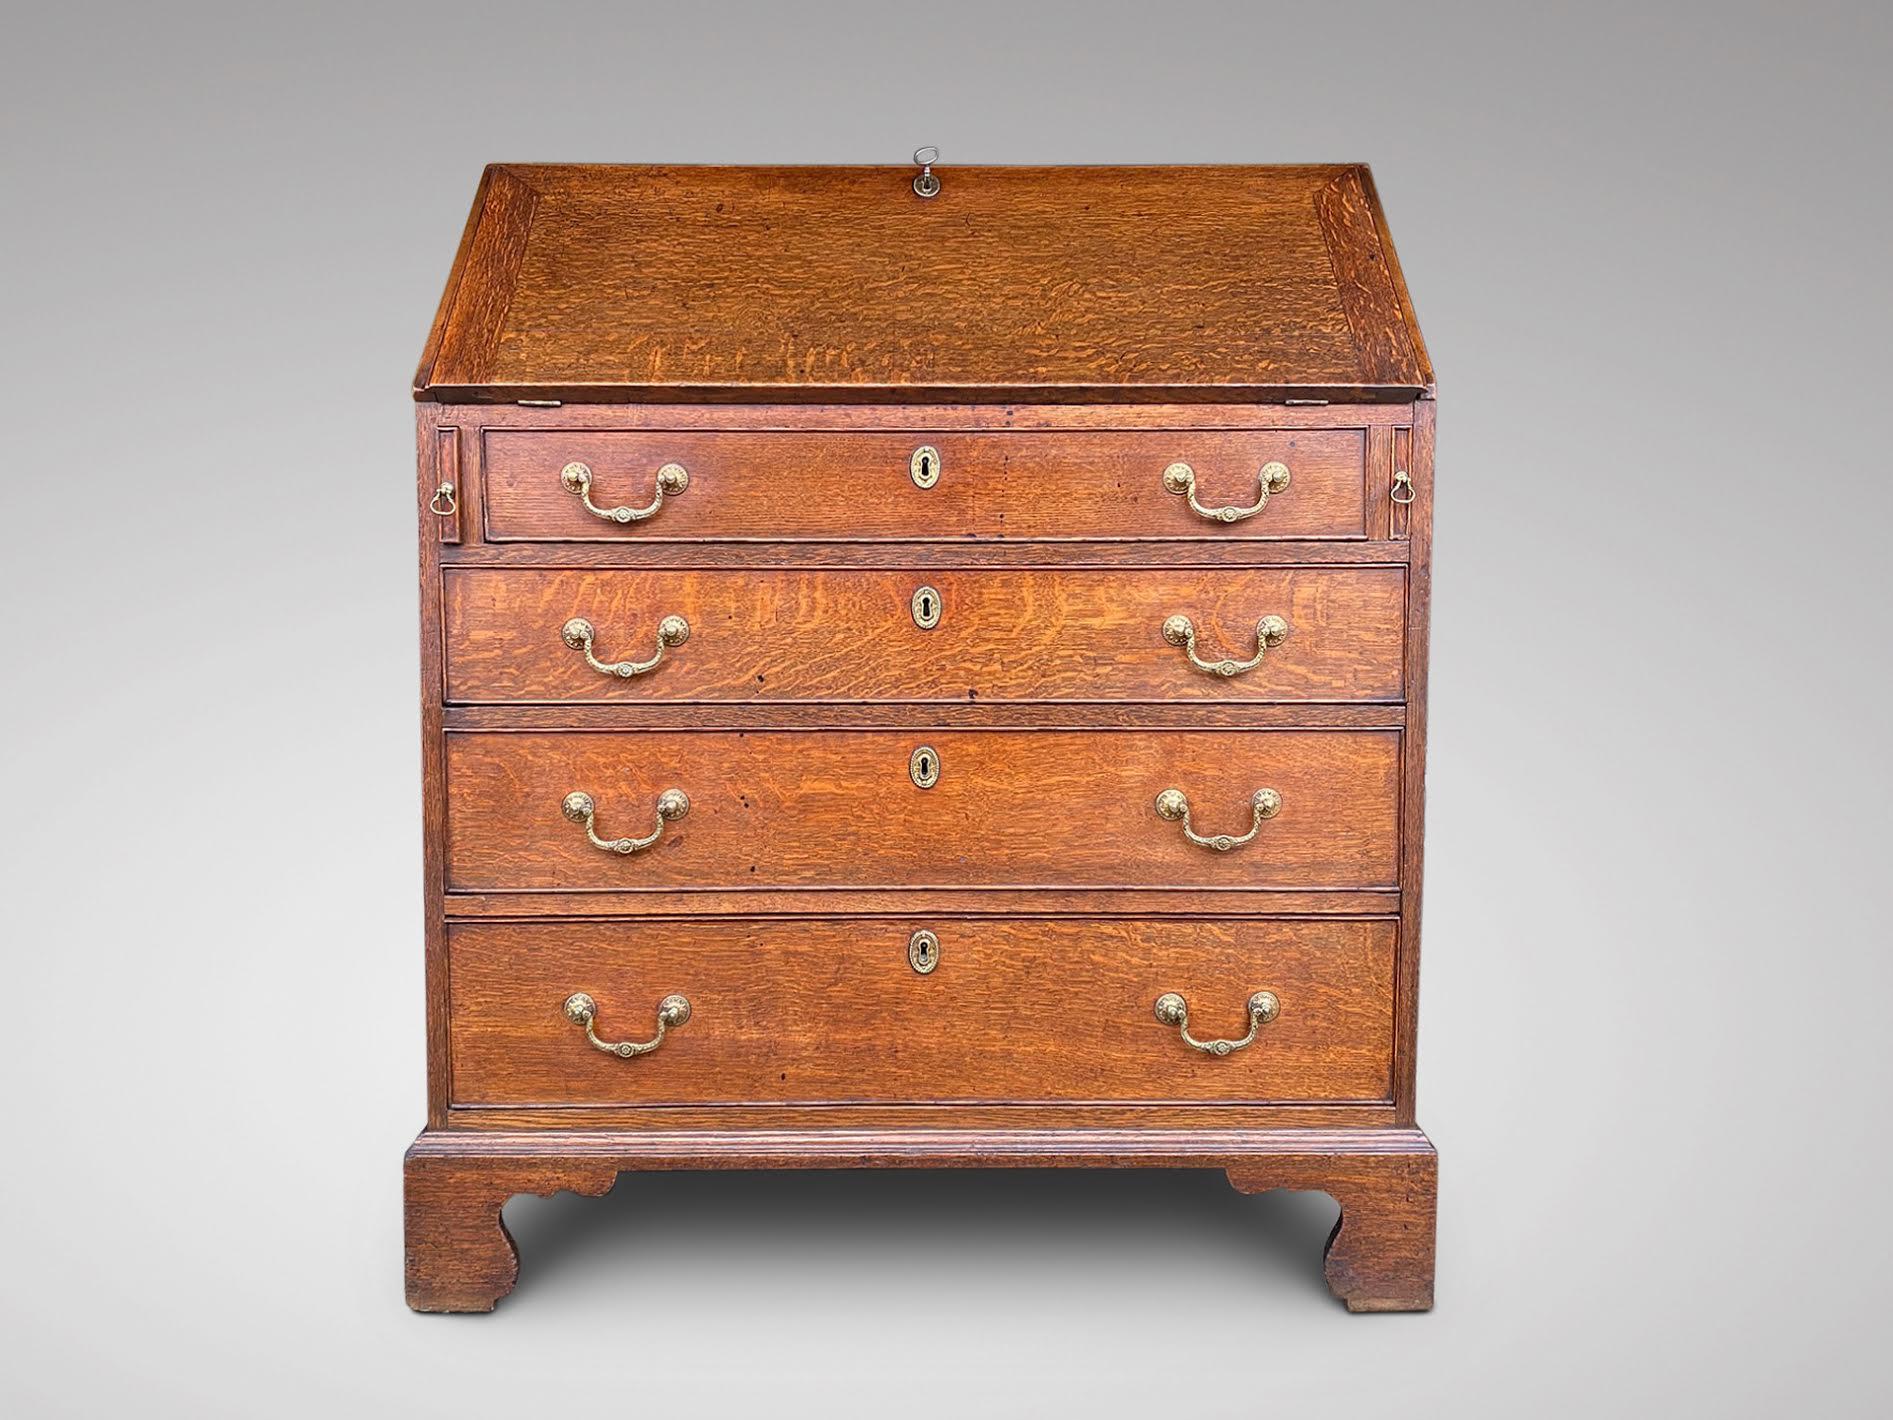 A late 18th century, fine George III period solid light oak bureau. The fall opens to reveal an interior with pigeon holes and drawers, above four long graduated drawers fitted with original brass swan neck handles and escutcheons, standing on